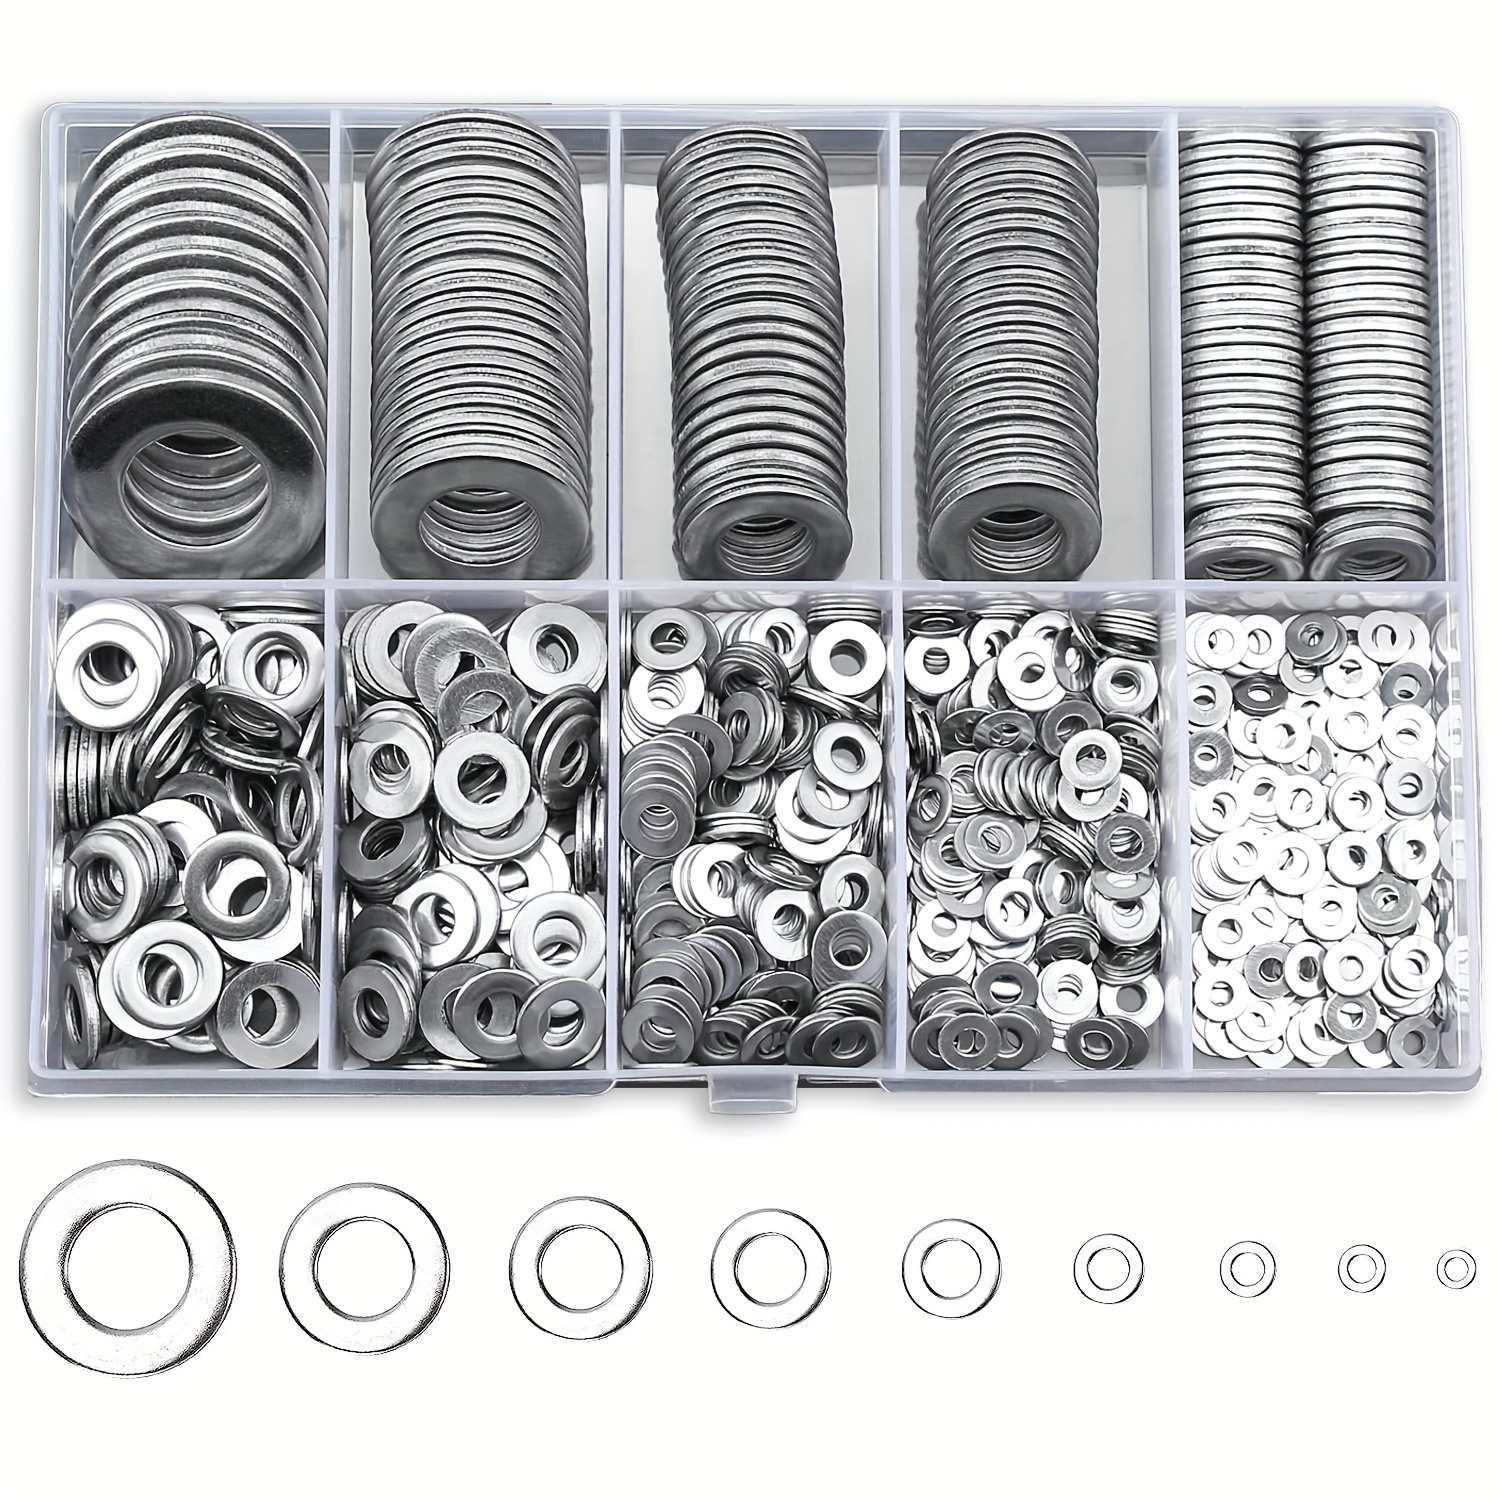 300pcs Internal Tooth Starlock Washers Quick Speed Locking Washers Push On  Retainers Clips Push On Nut Fasteners Assortment Kit For Shaft And Stud, Find Great Deals Now